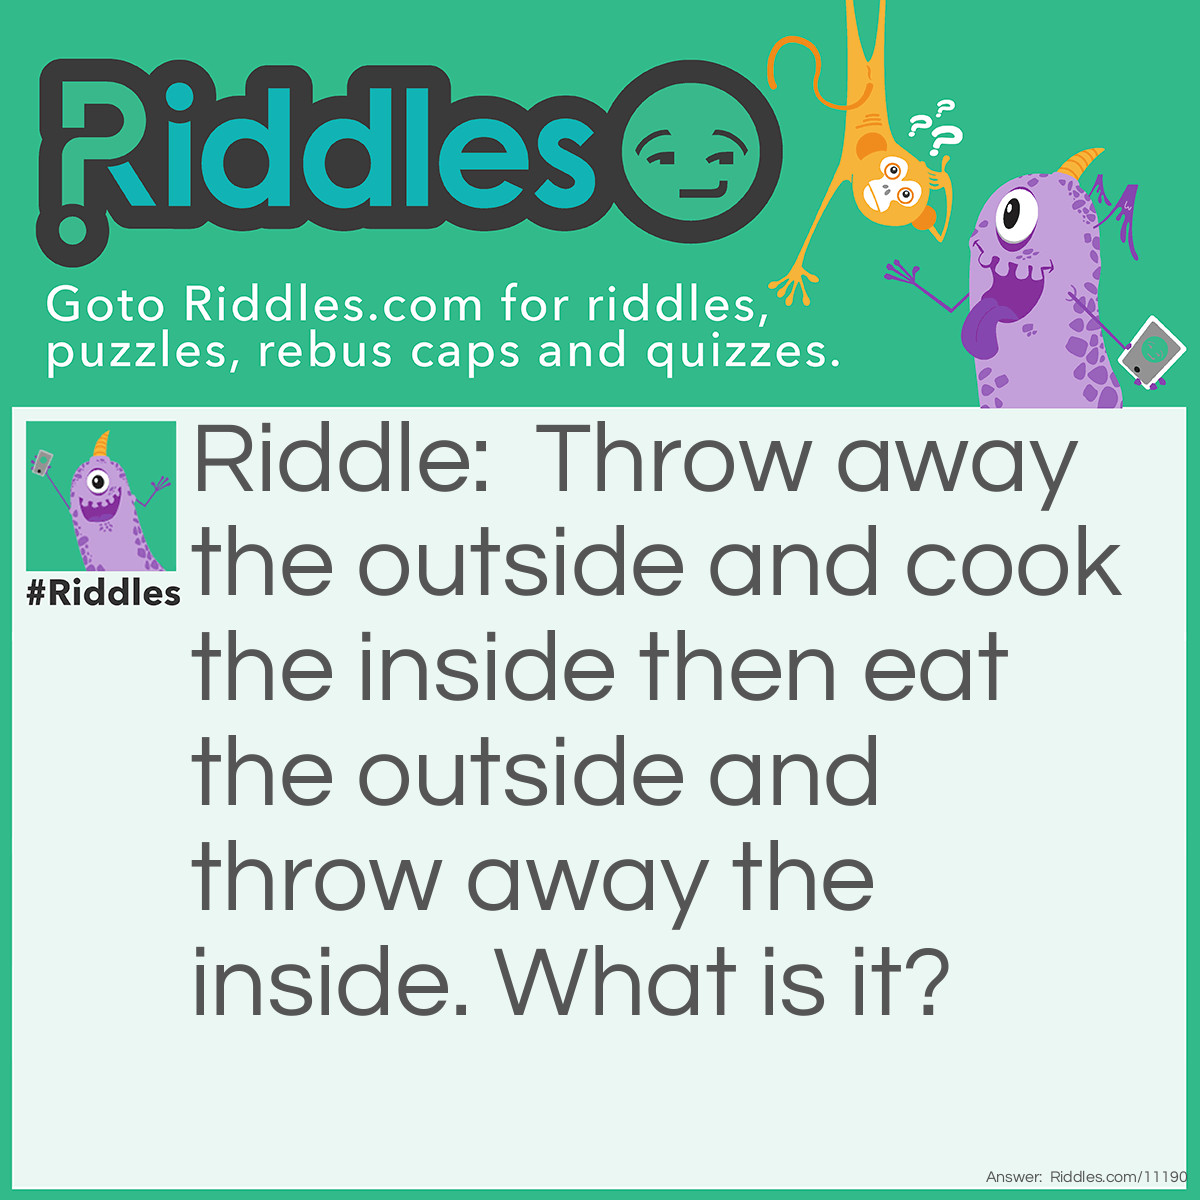 Riddle: Throw away the outside and cook the inside then eat the outside and throw away the inside. What is it? Answer: Corn in the Cob